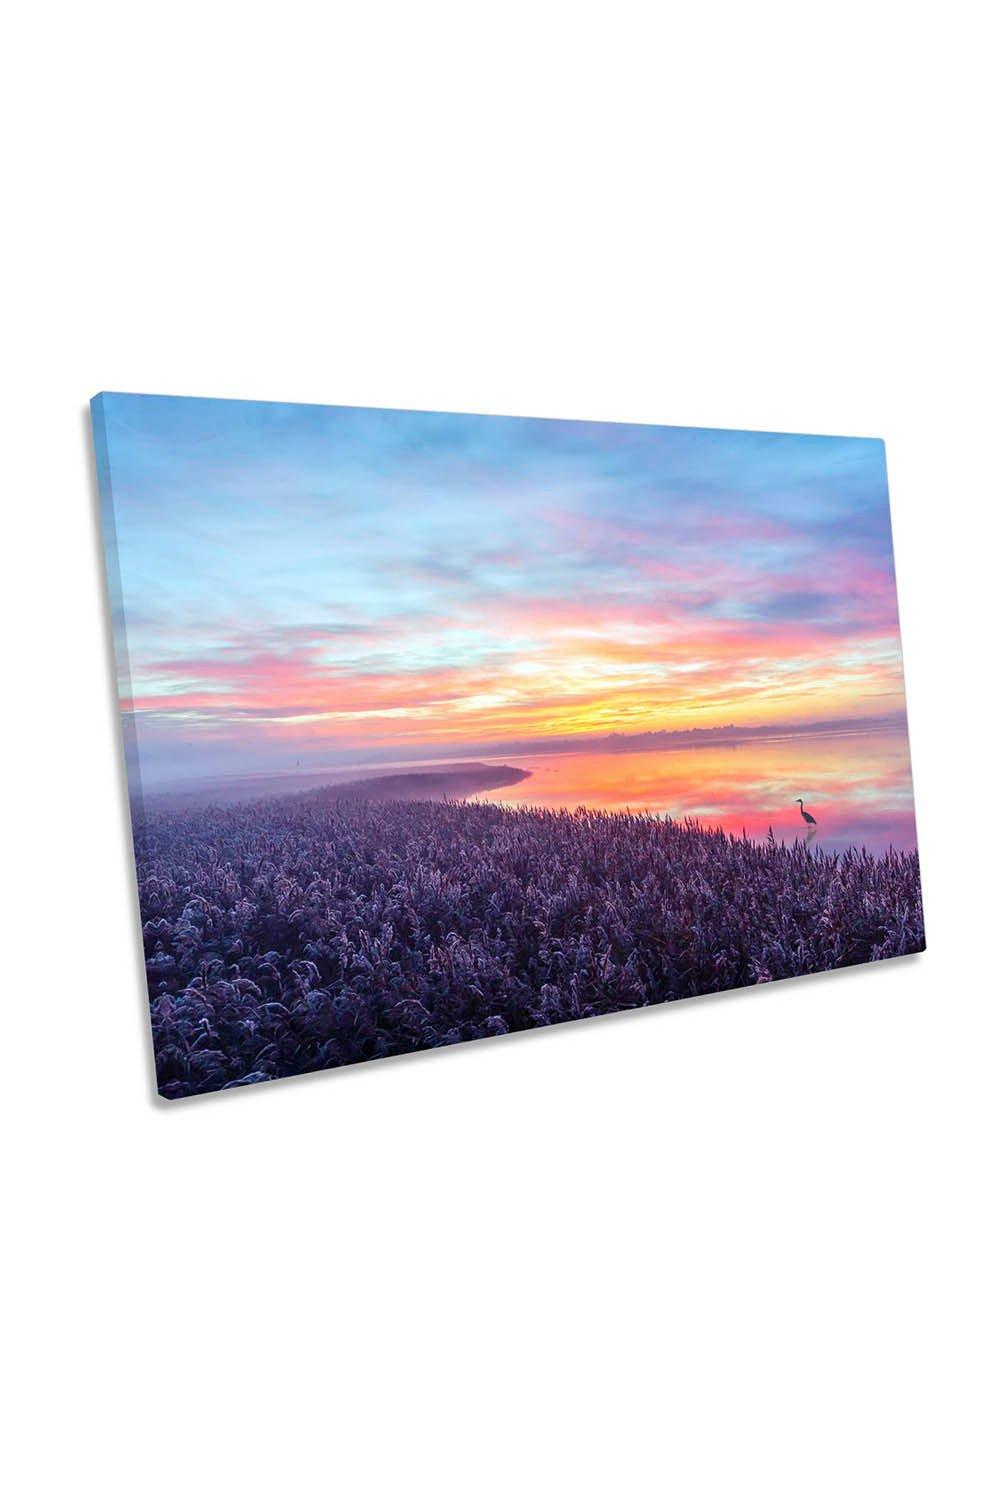 The Heron's Morning View Sunrise Lake Canvas Wall Art Picture Print